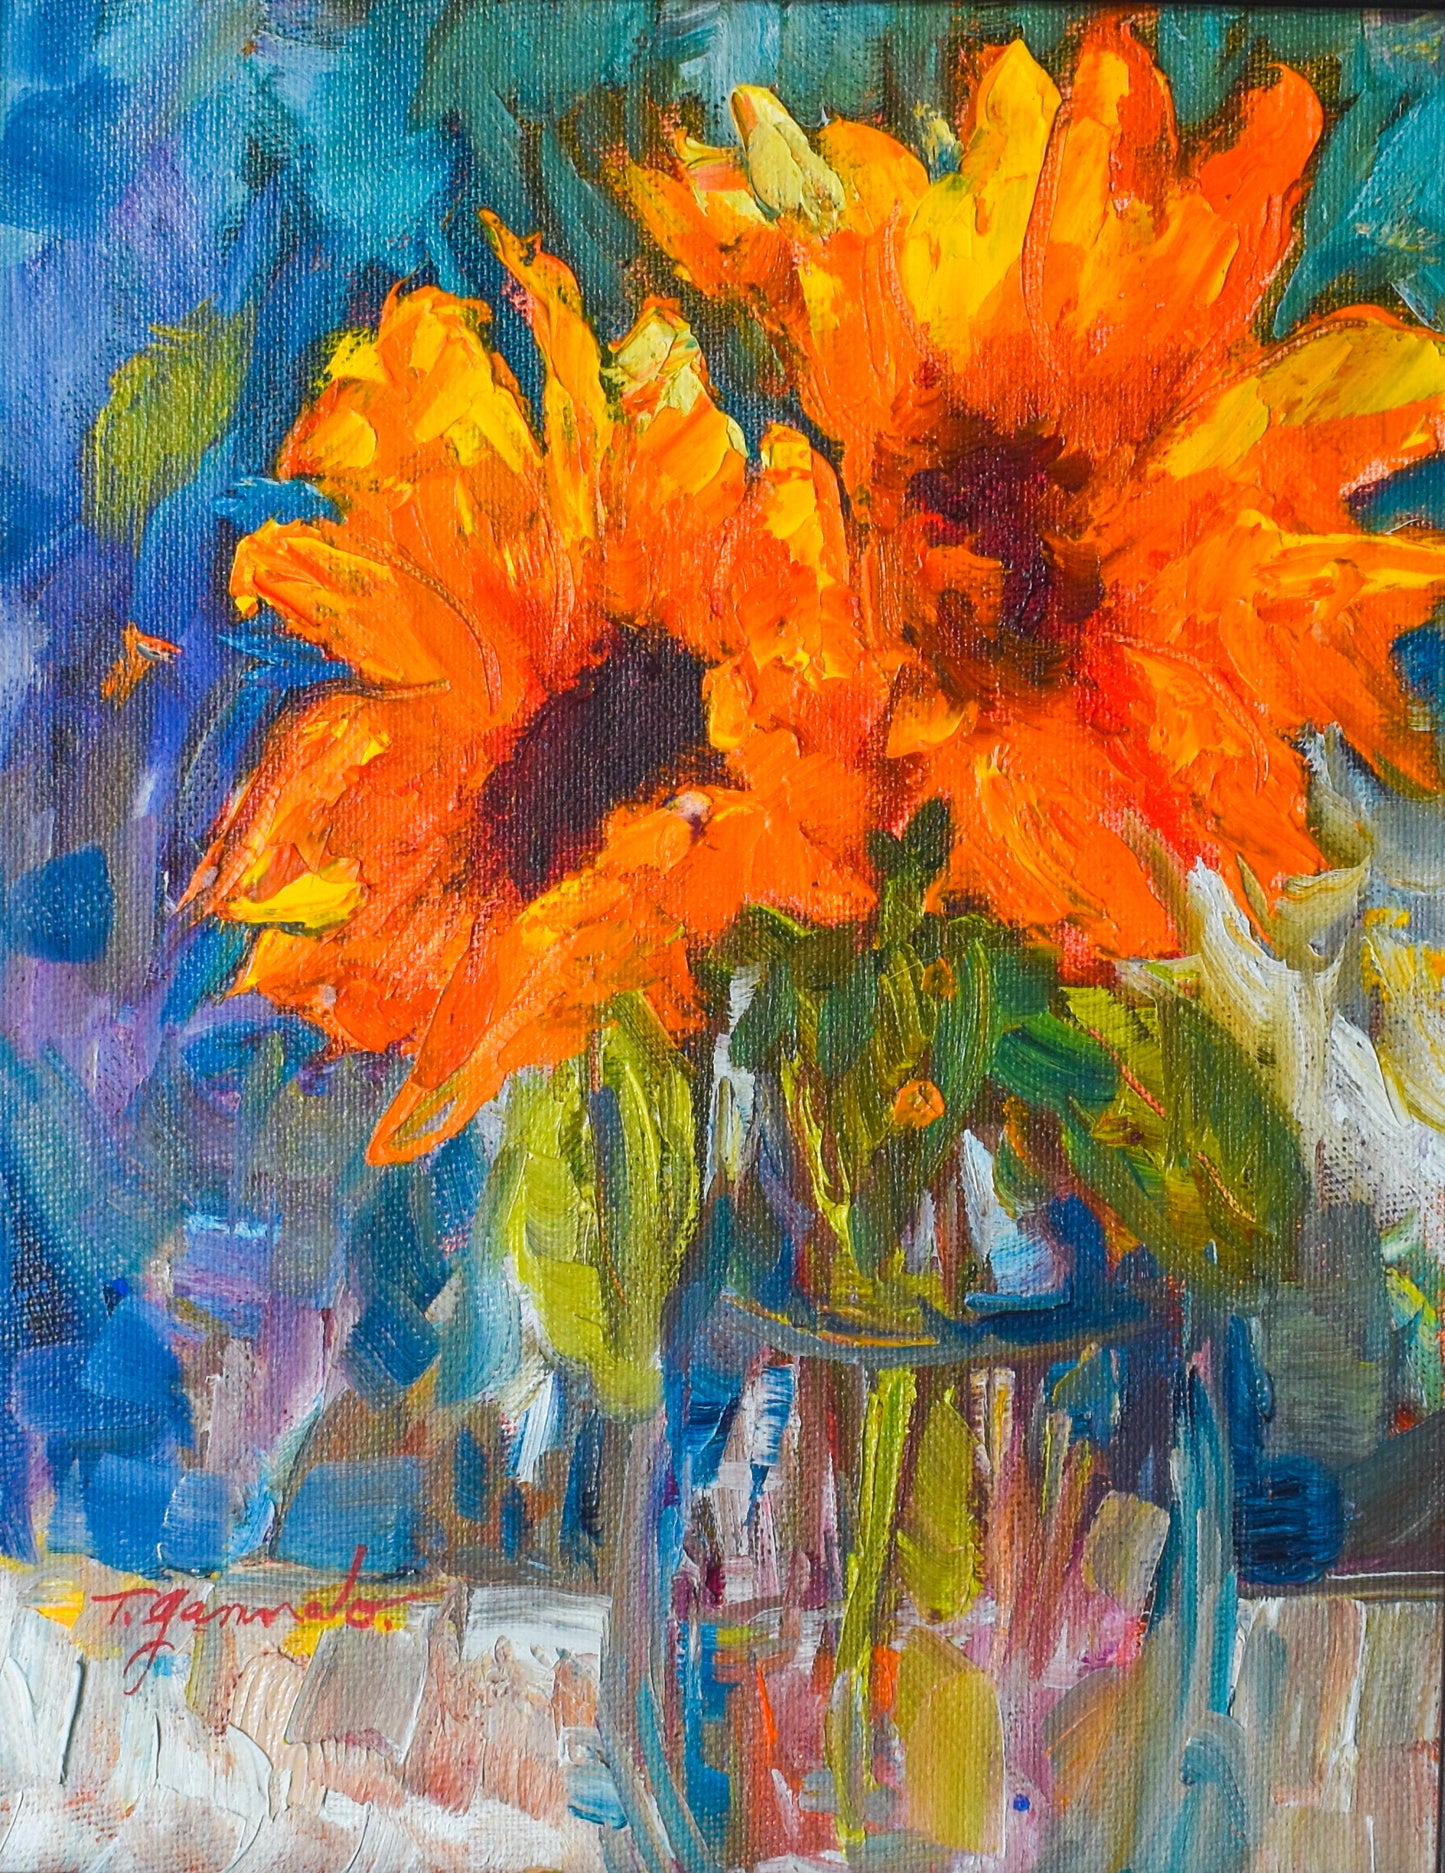 Two sunflowers are positioned in a clear vase. The background is teal and blue hues. 